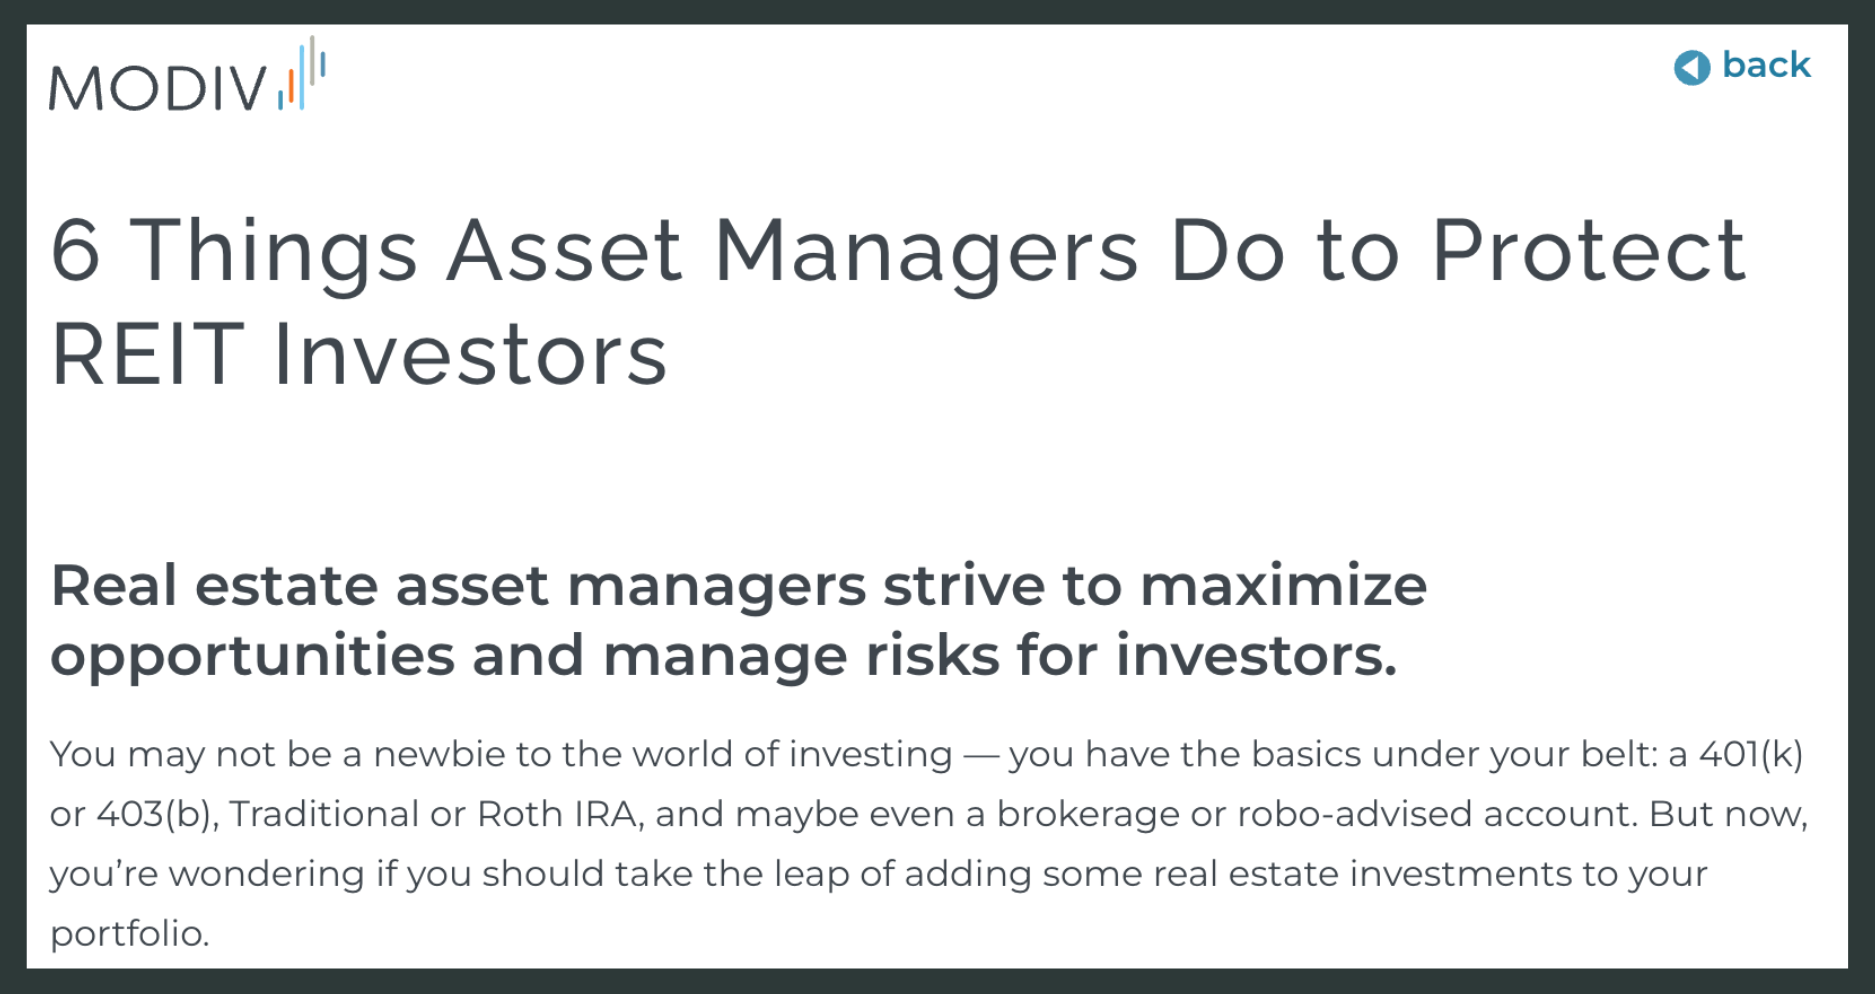 Modiv Ad - 6 Things Asset Mangers Do to Protec REIT Investors